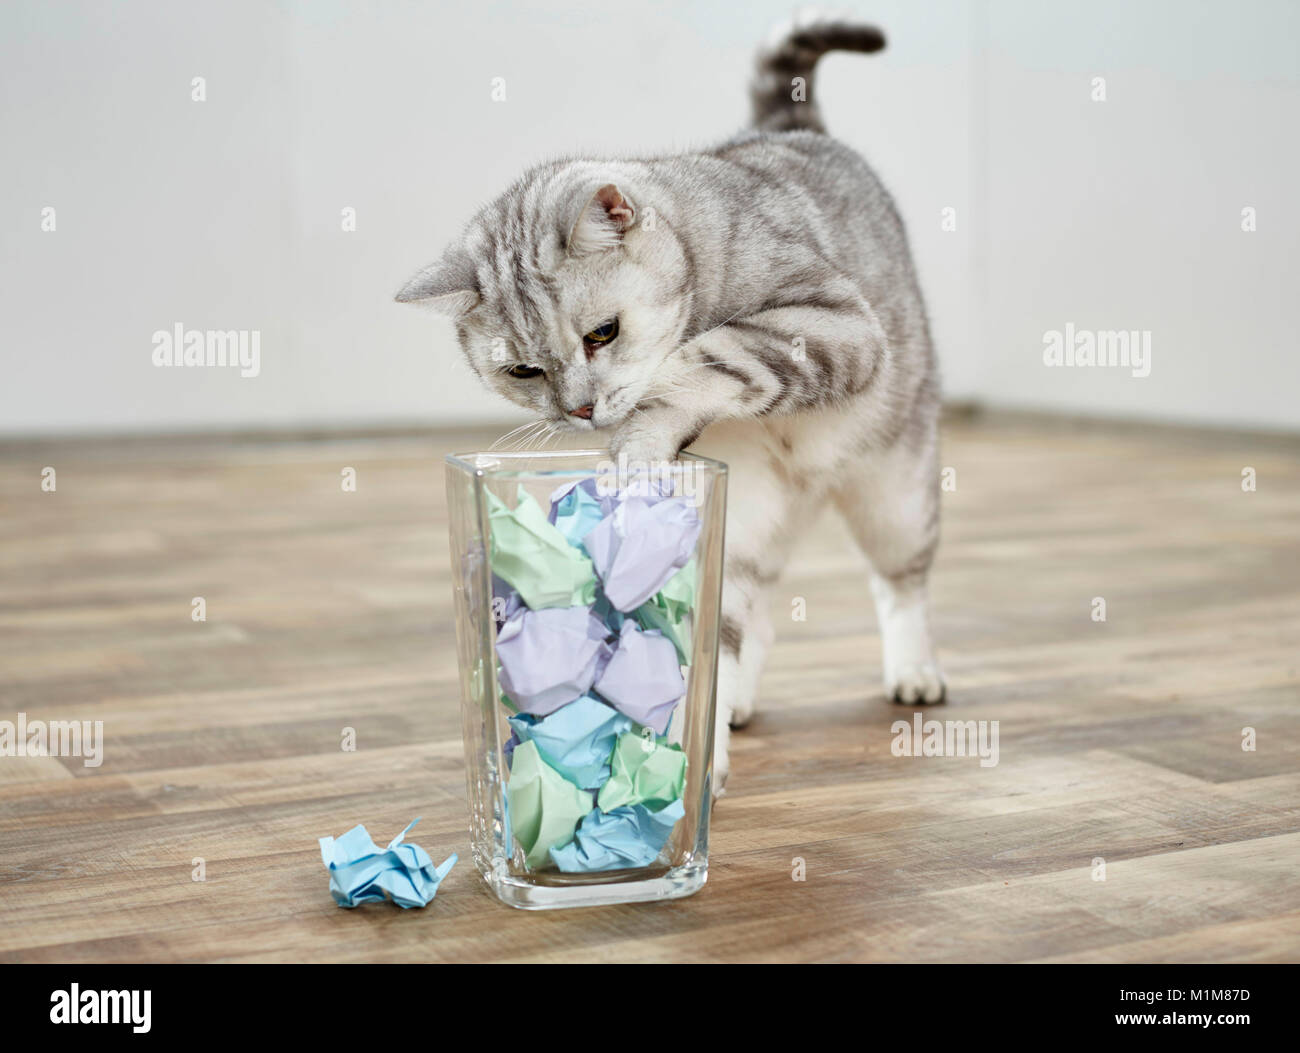 British Shorthair cat. Tabby adult angling a crumbled paper out from a glass container. Germany Stock Photo